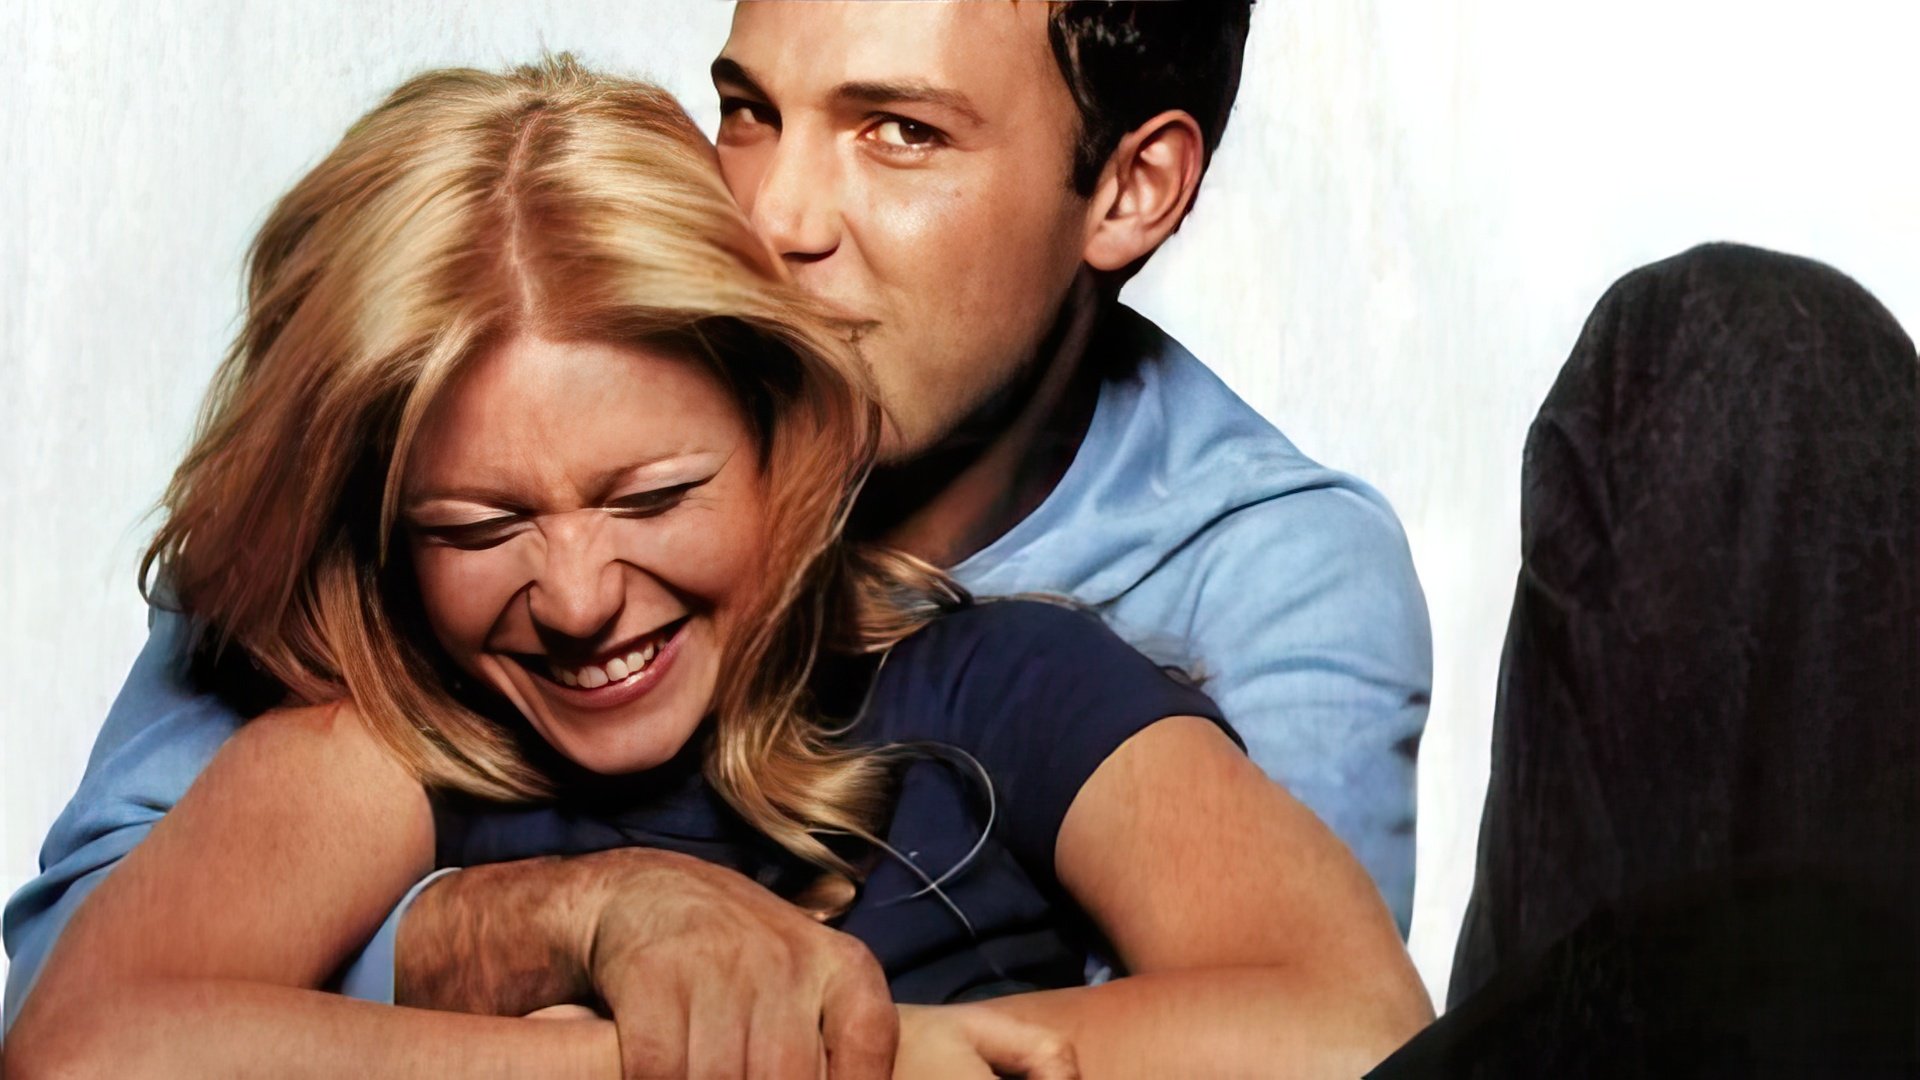 Ben Affleck and Gwyneth Paltrow were considered a perfect match